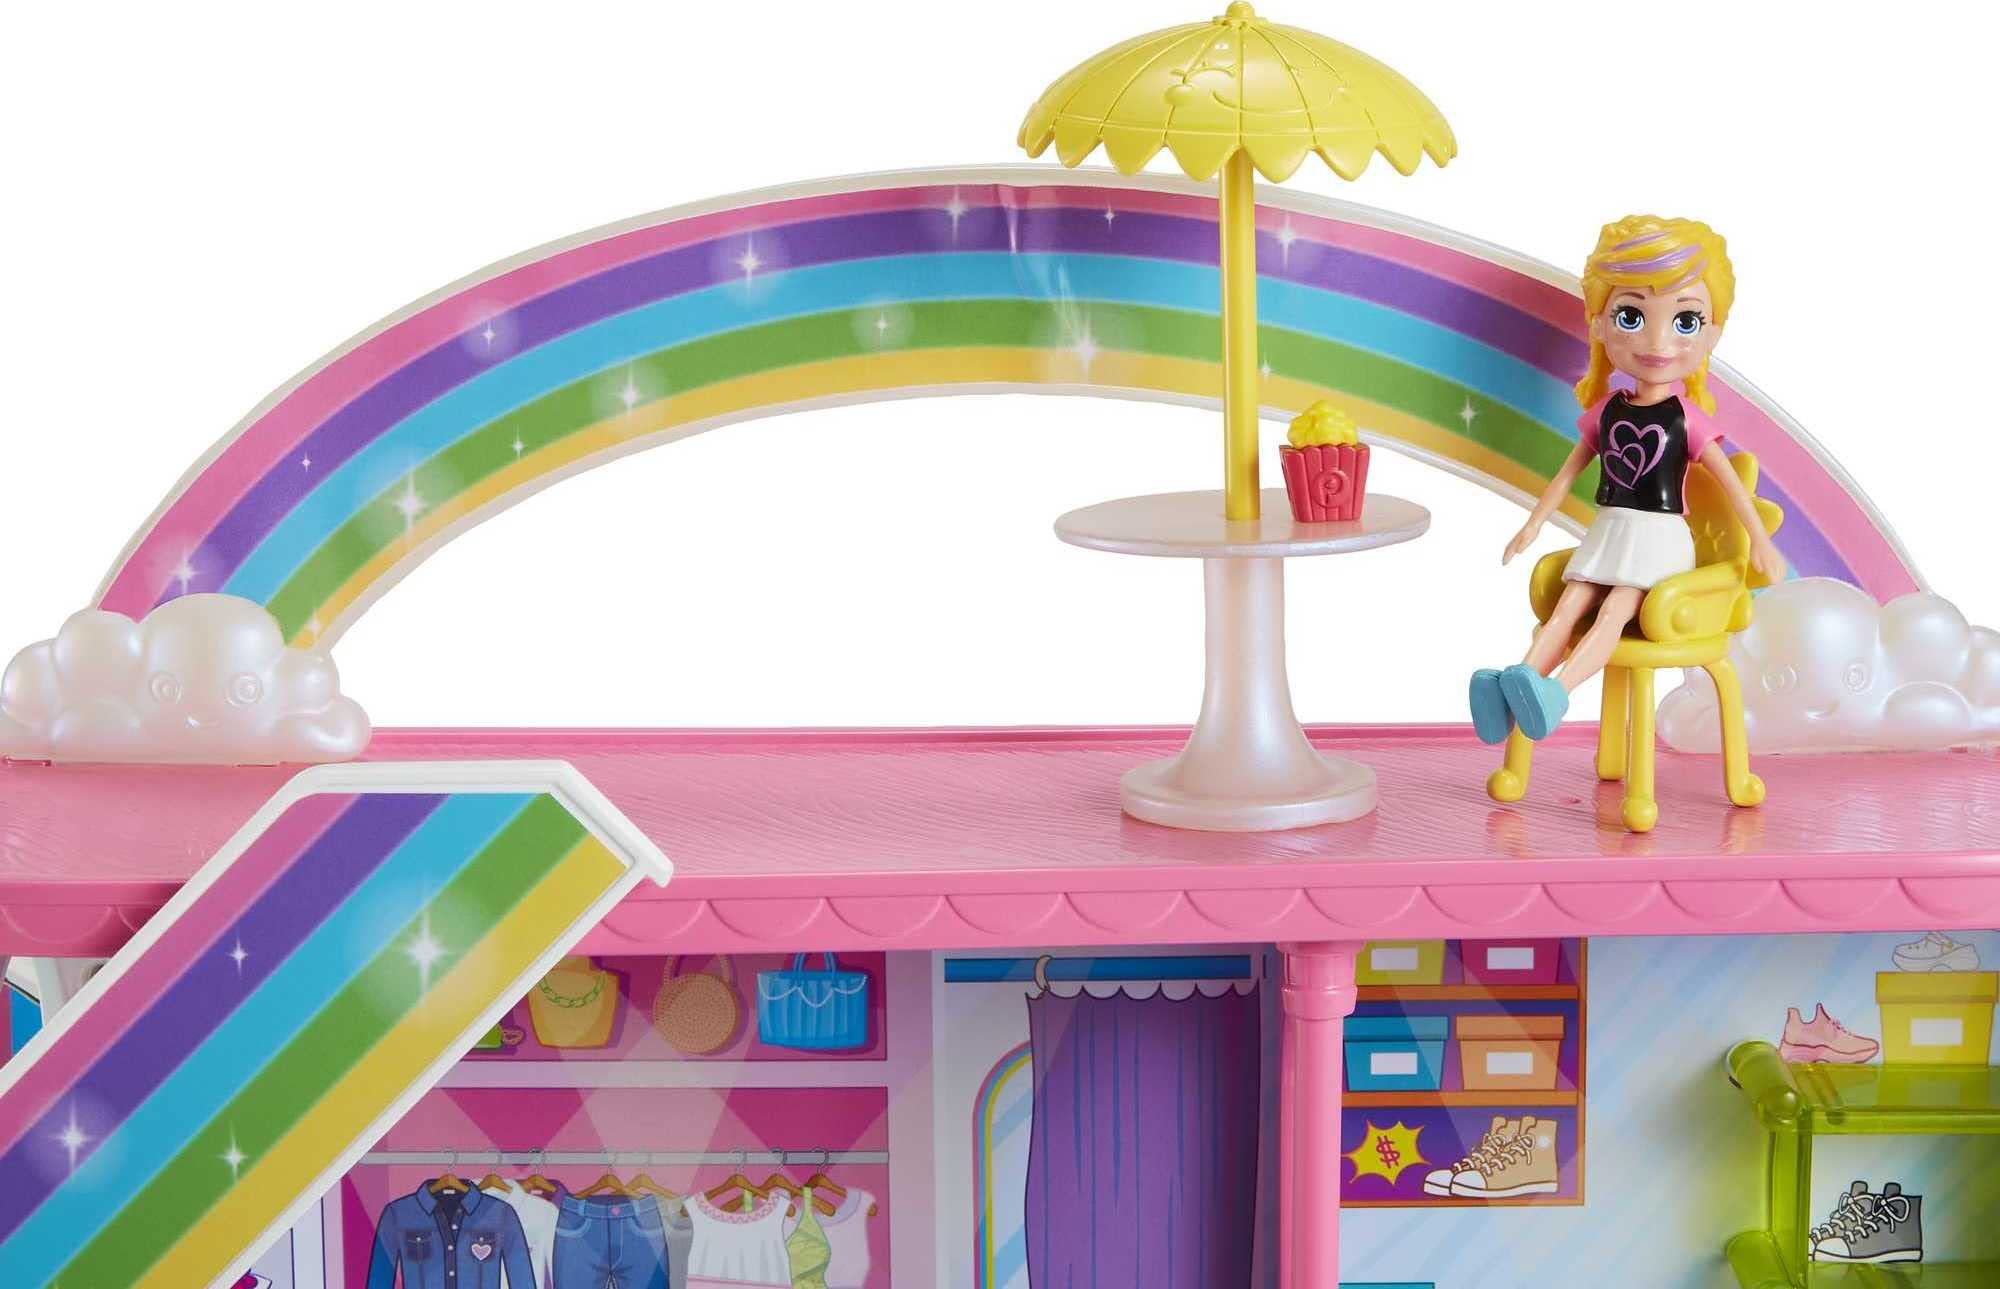 Polly Pocket Playset with 3-Inch Doll, 35+ Accessories, Sweet Adventures Rainbow Mall, 3 Floors, 9 Play Areas